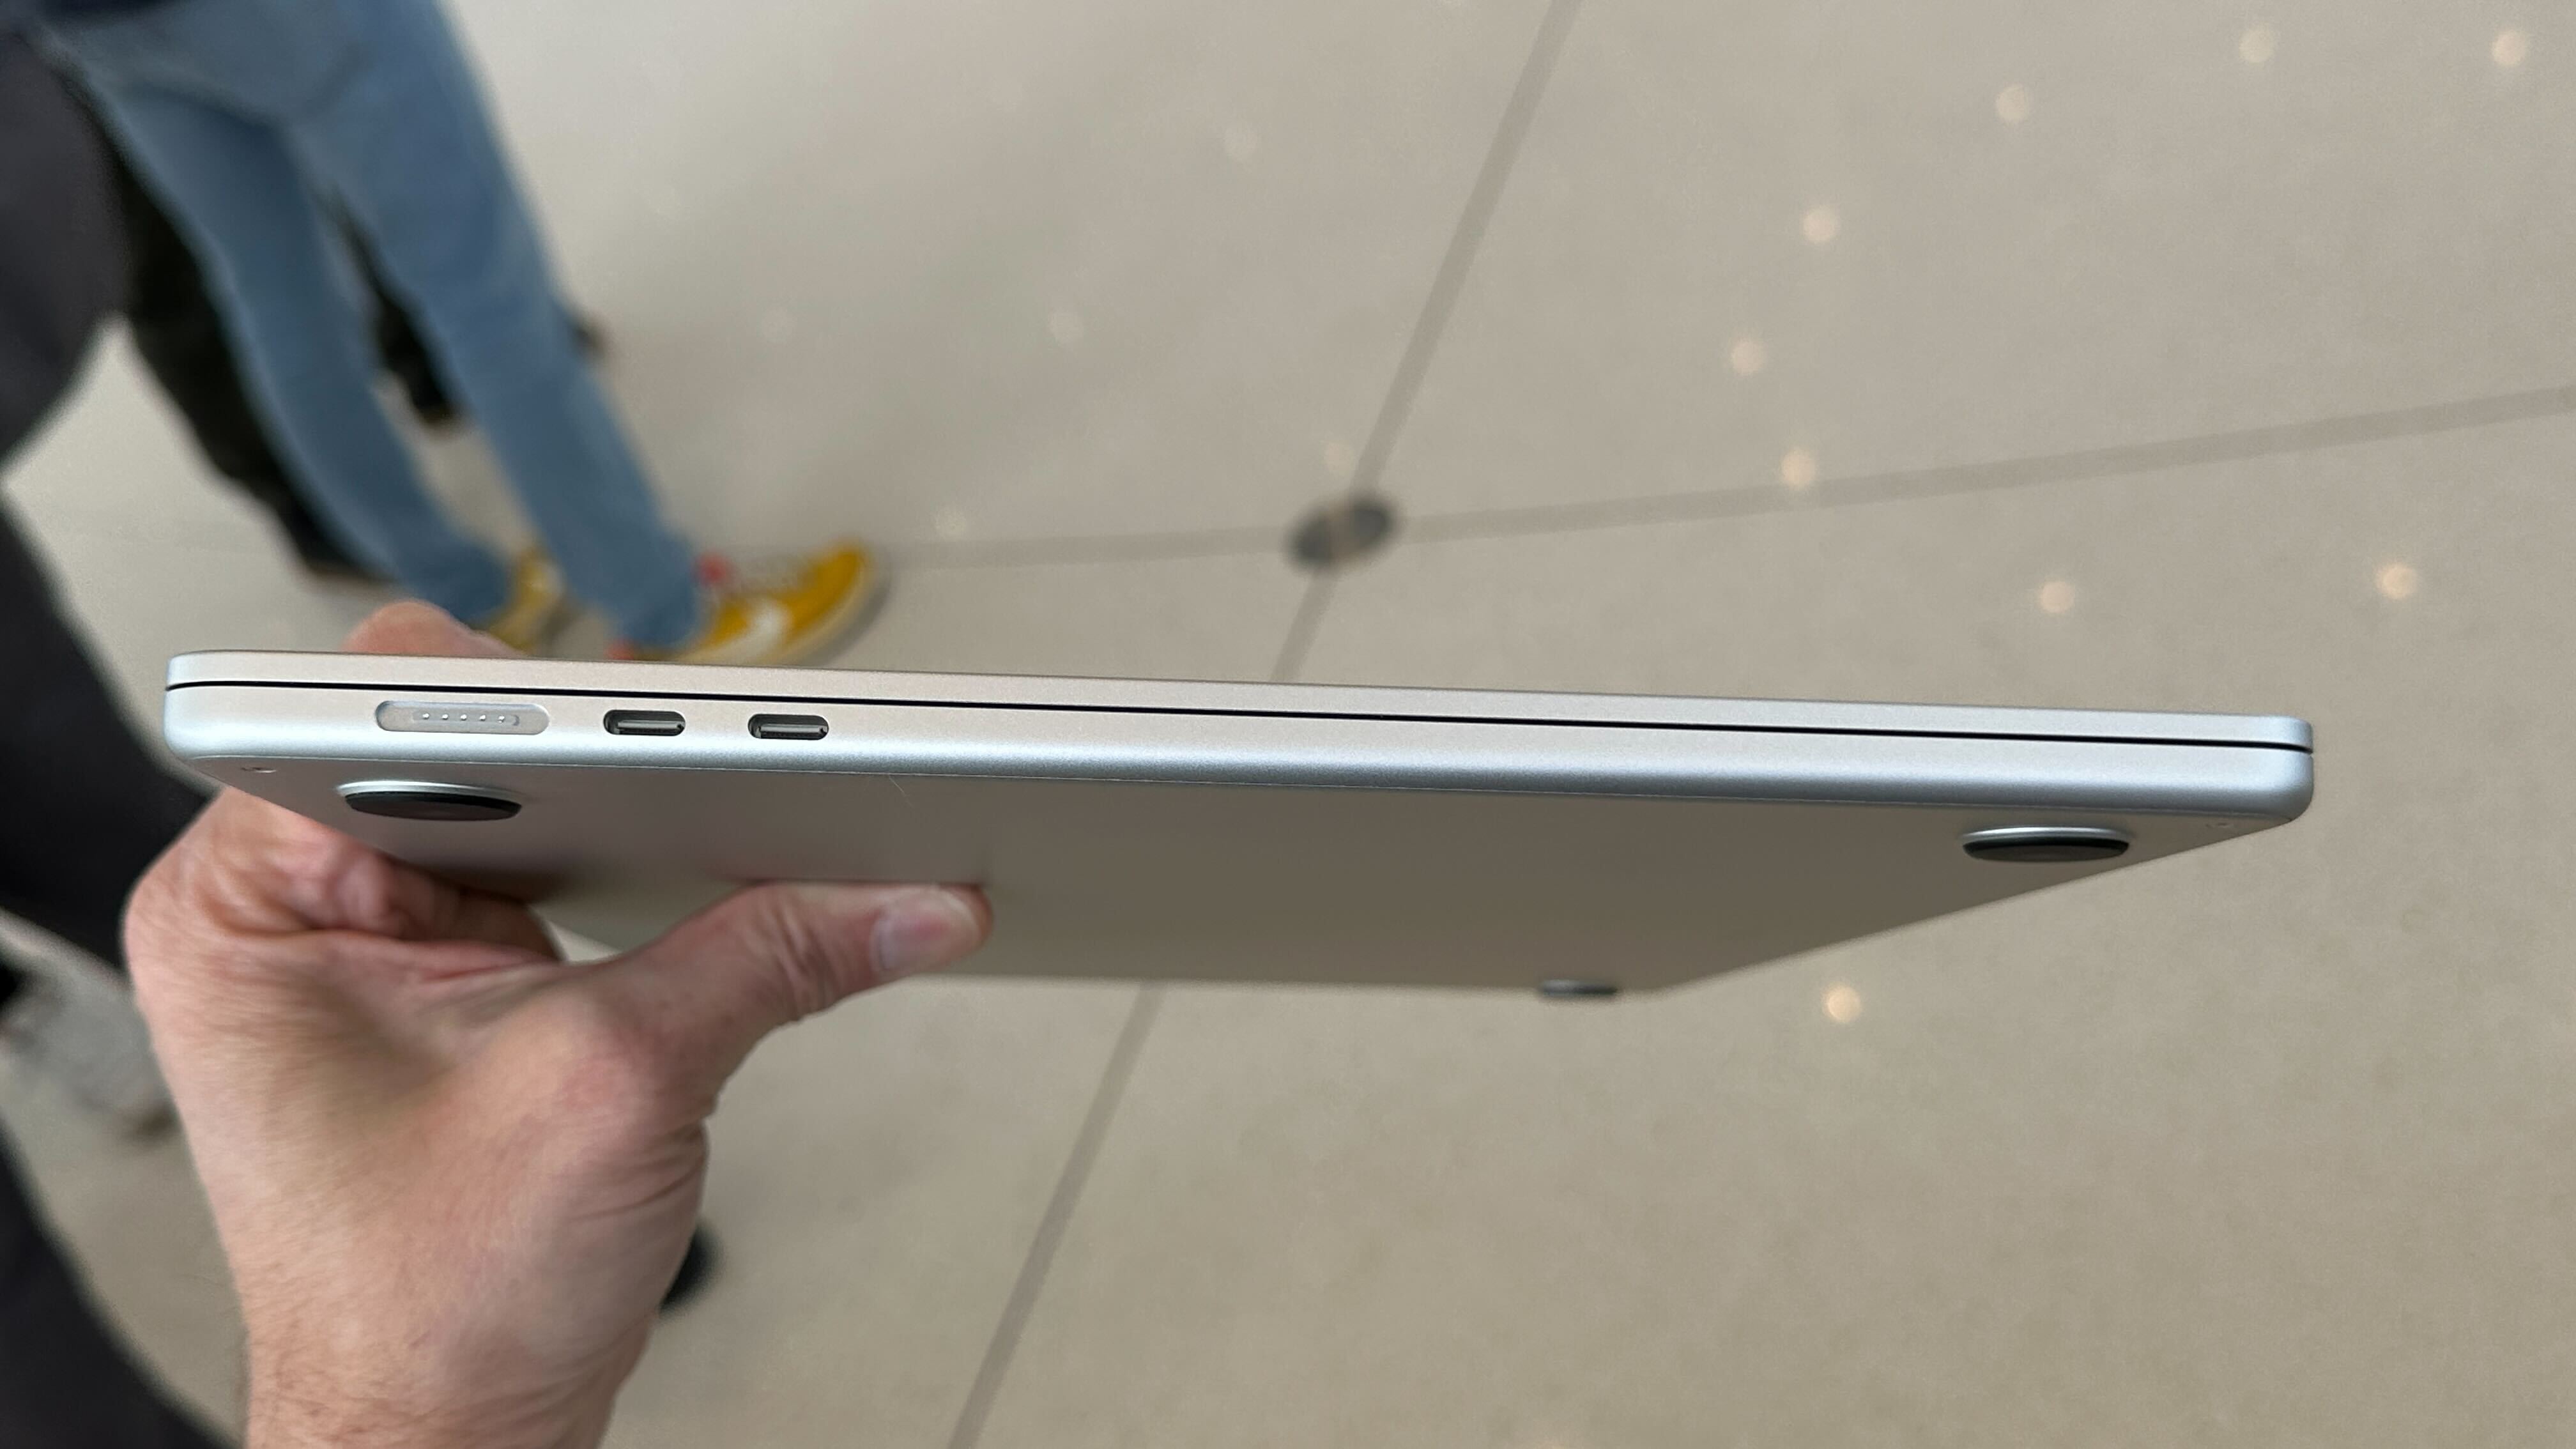 Macbook Air 15 inch from the side